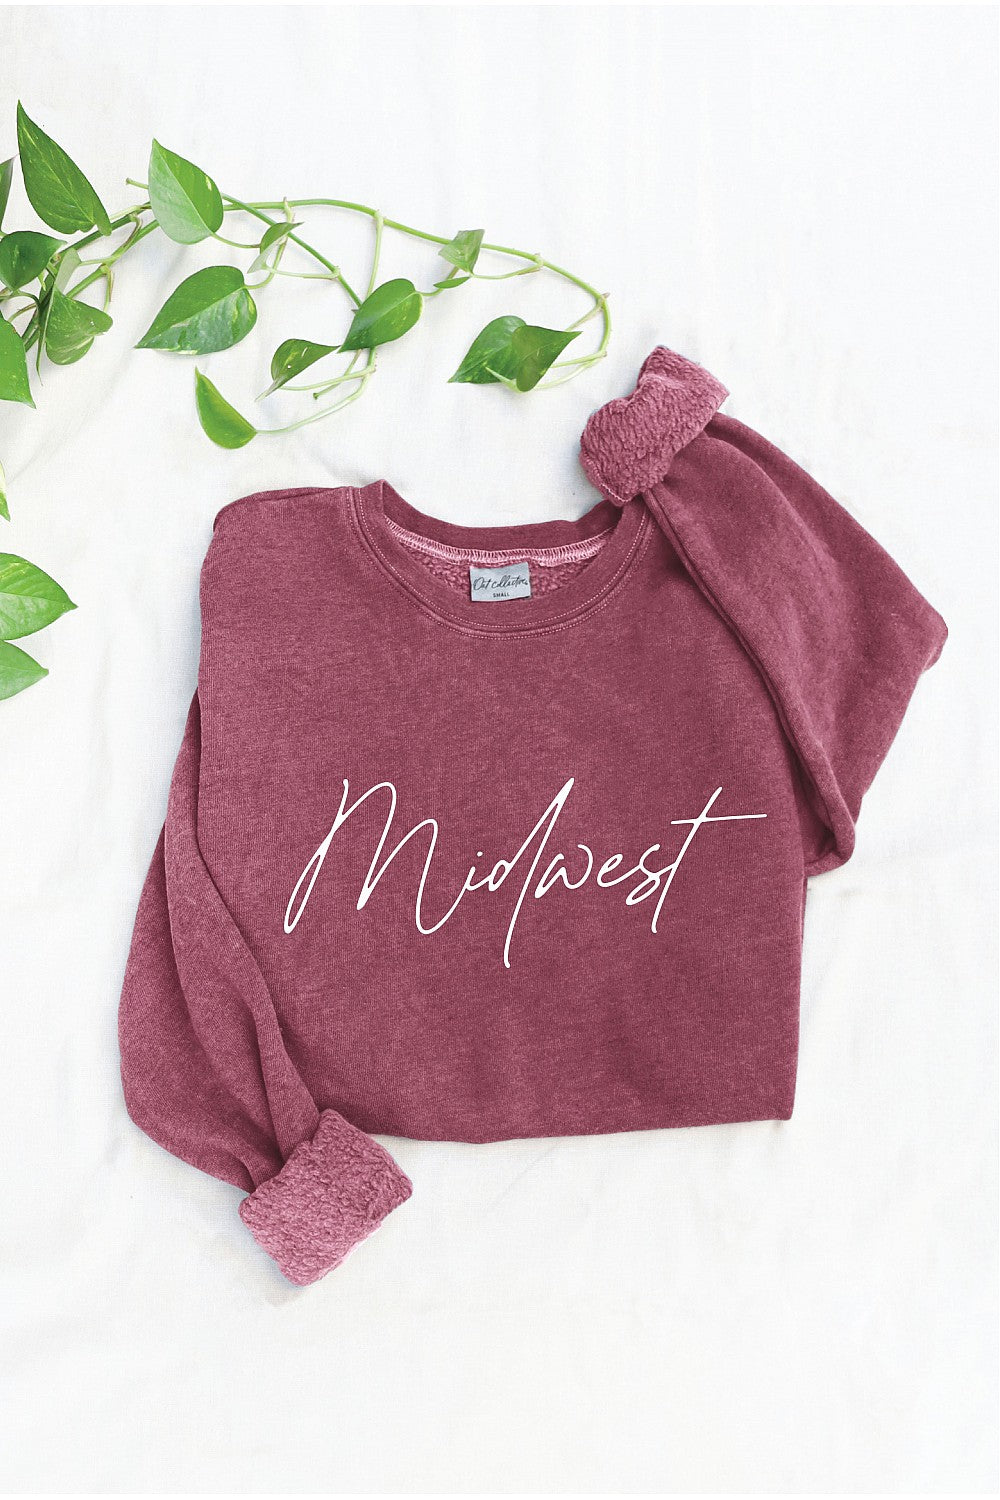 Midwest mineral graphic sweatshirt- Red